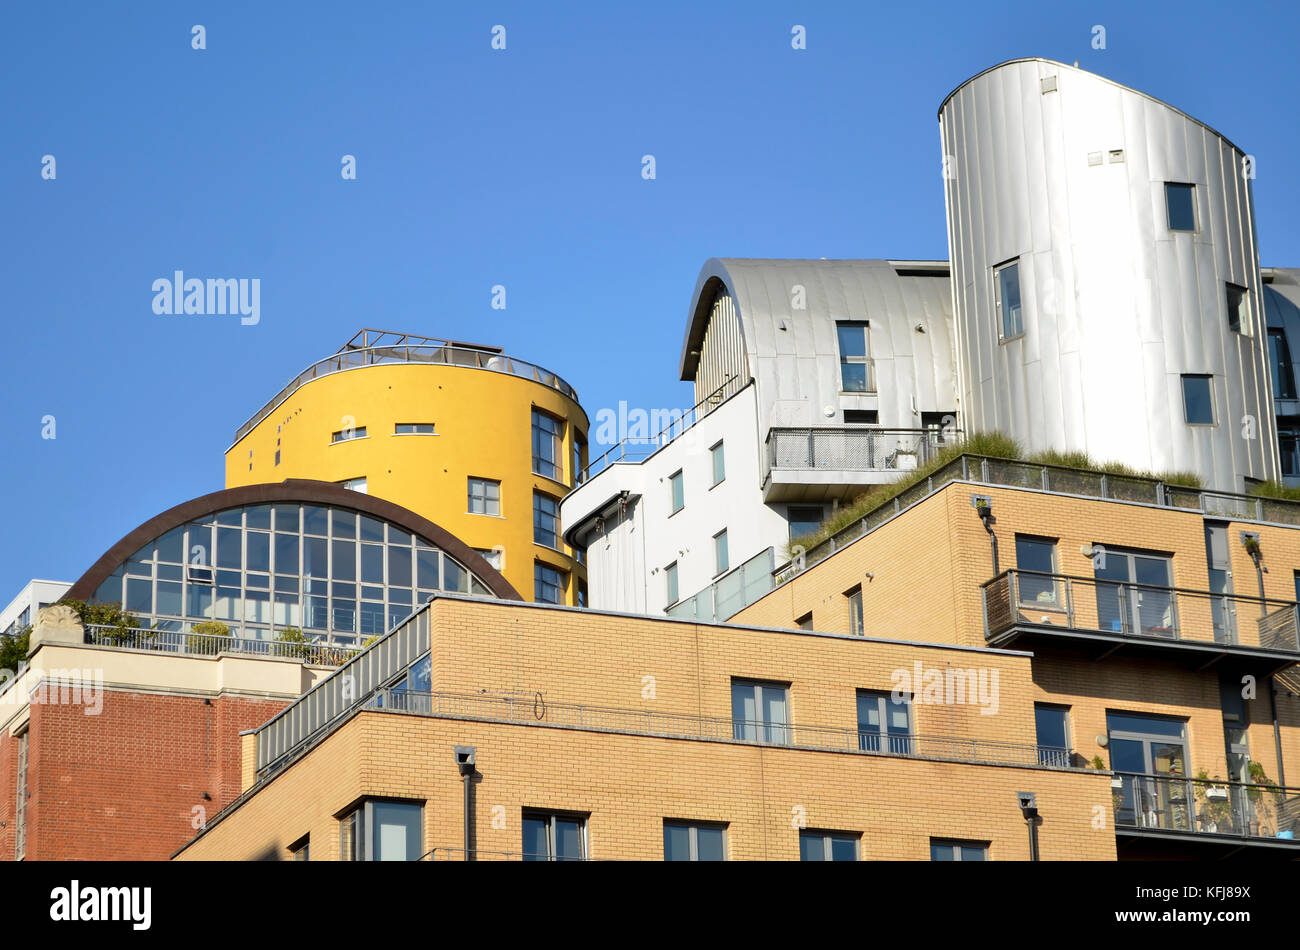 Aluminium cladding on buildings, Castle Yard seen from Hopton Street, London, SE1, UK. Yellow tower of 43 Holland Street behind. Stock Photo